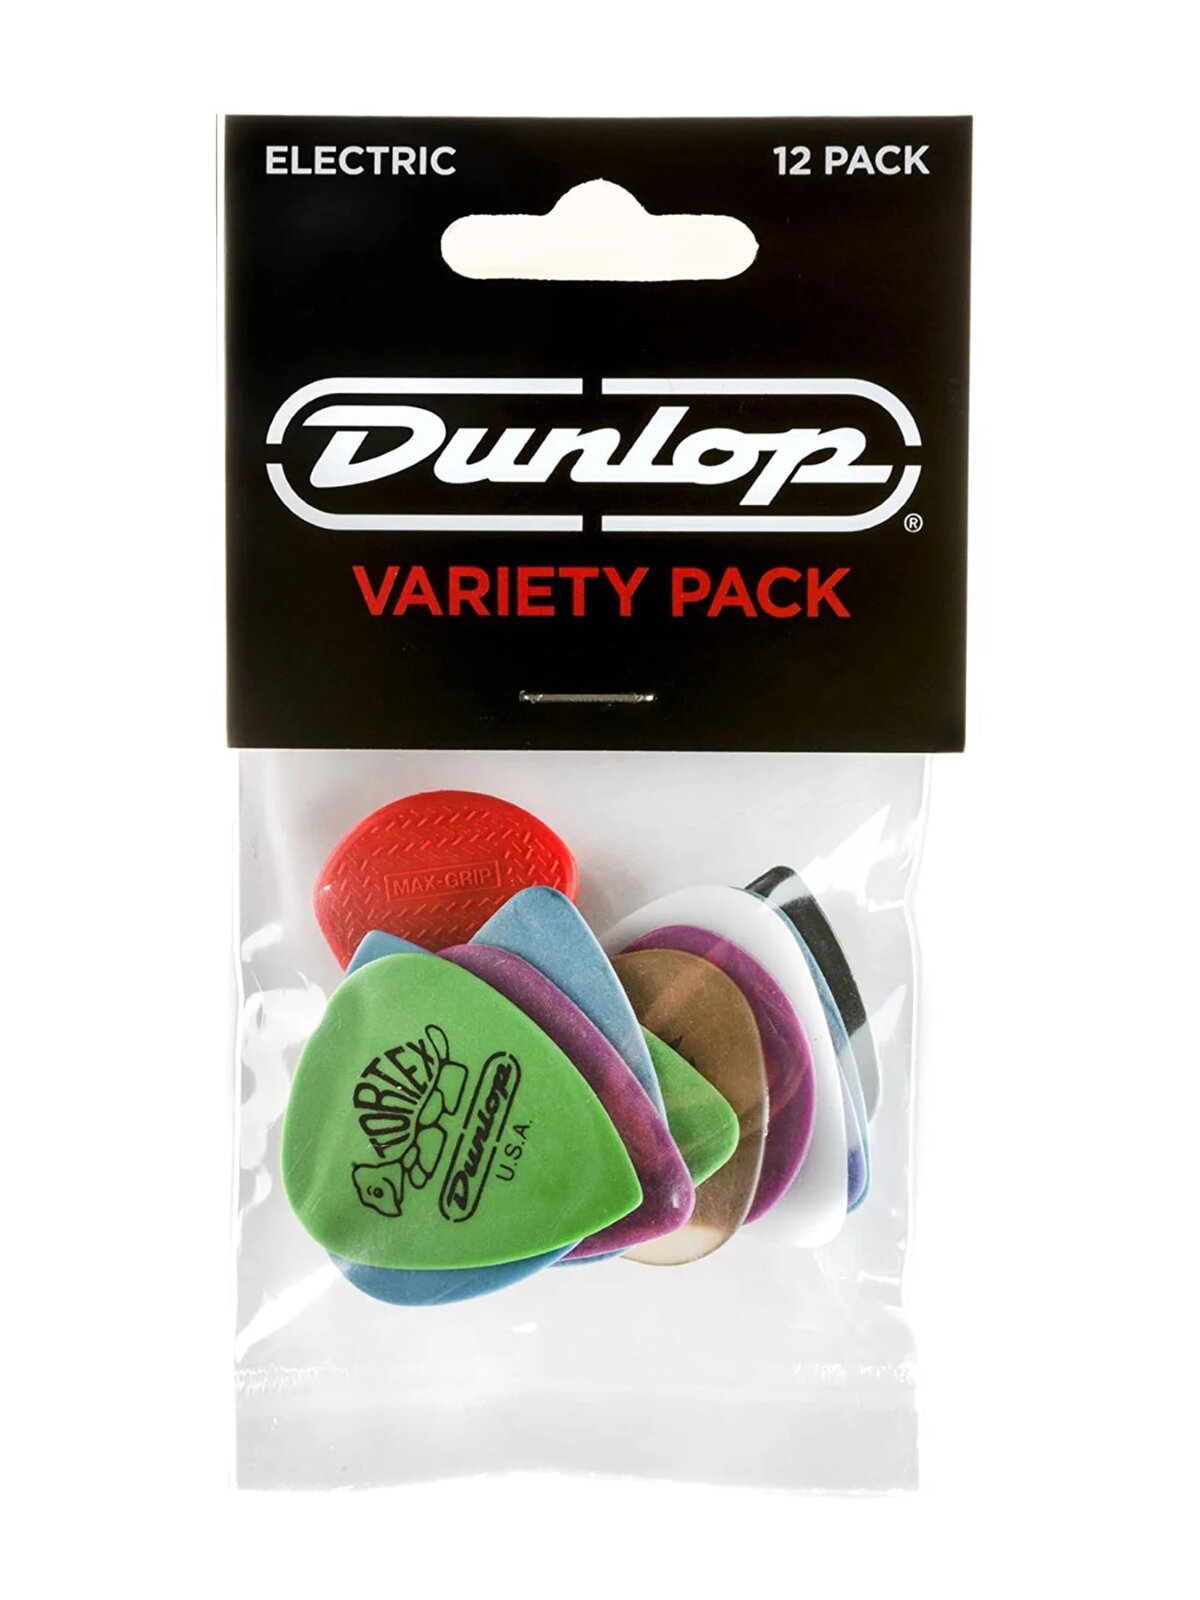 Dunlop PVP113 Electric Pick Variety Pack 12 assorted picks : photo 1